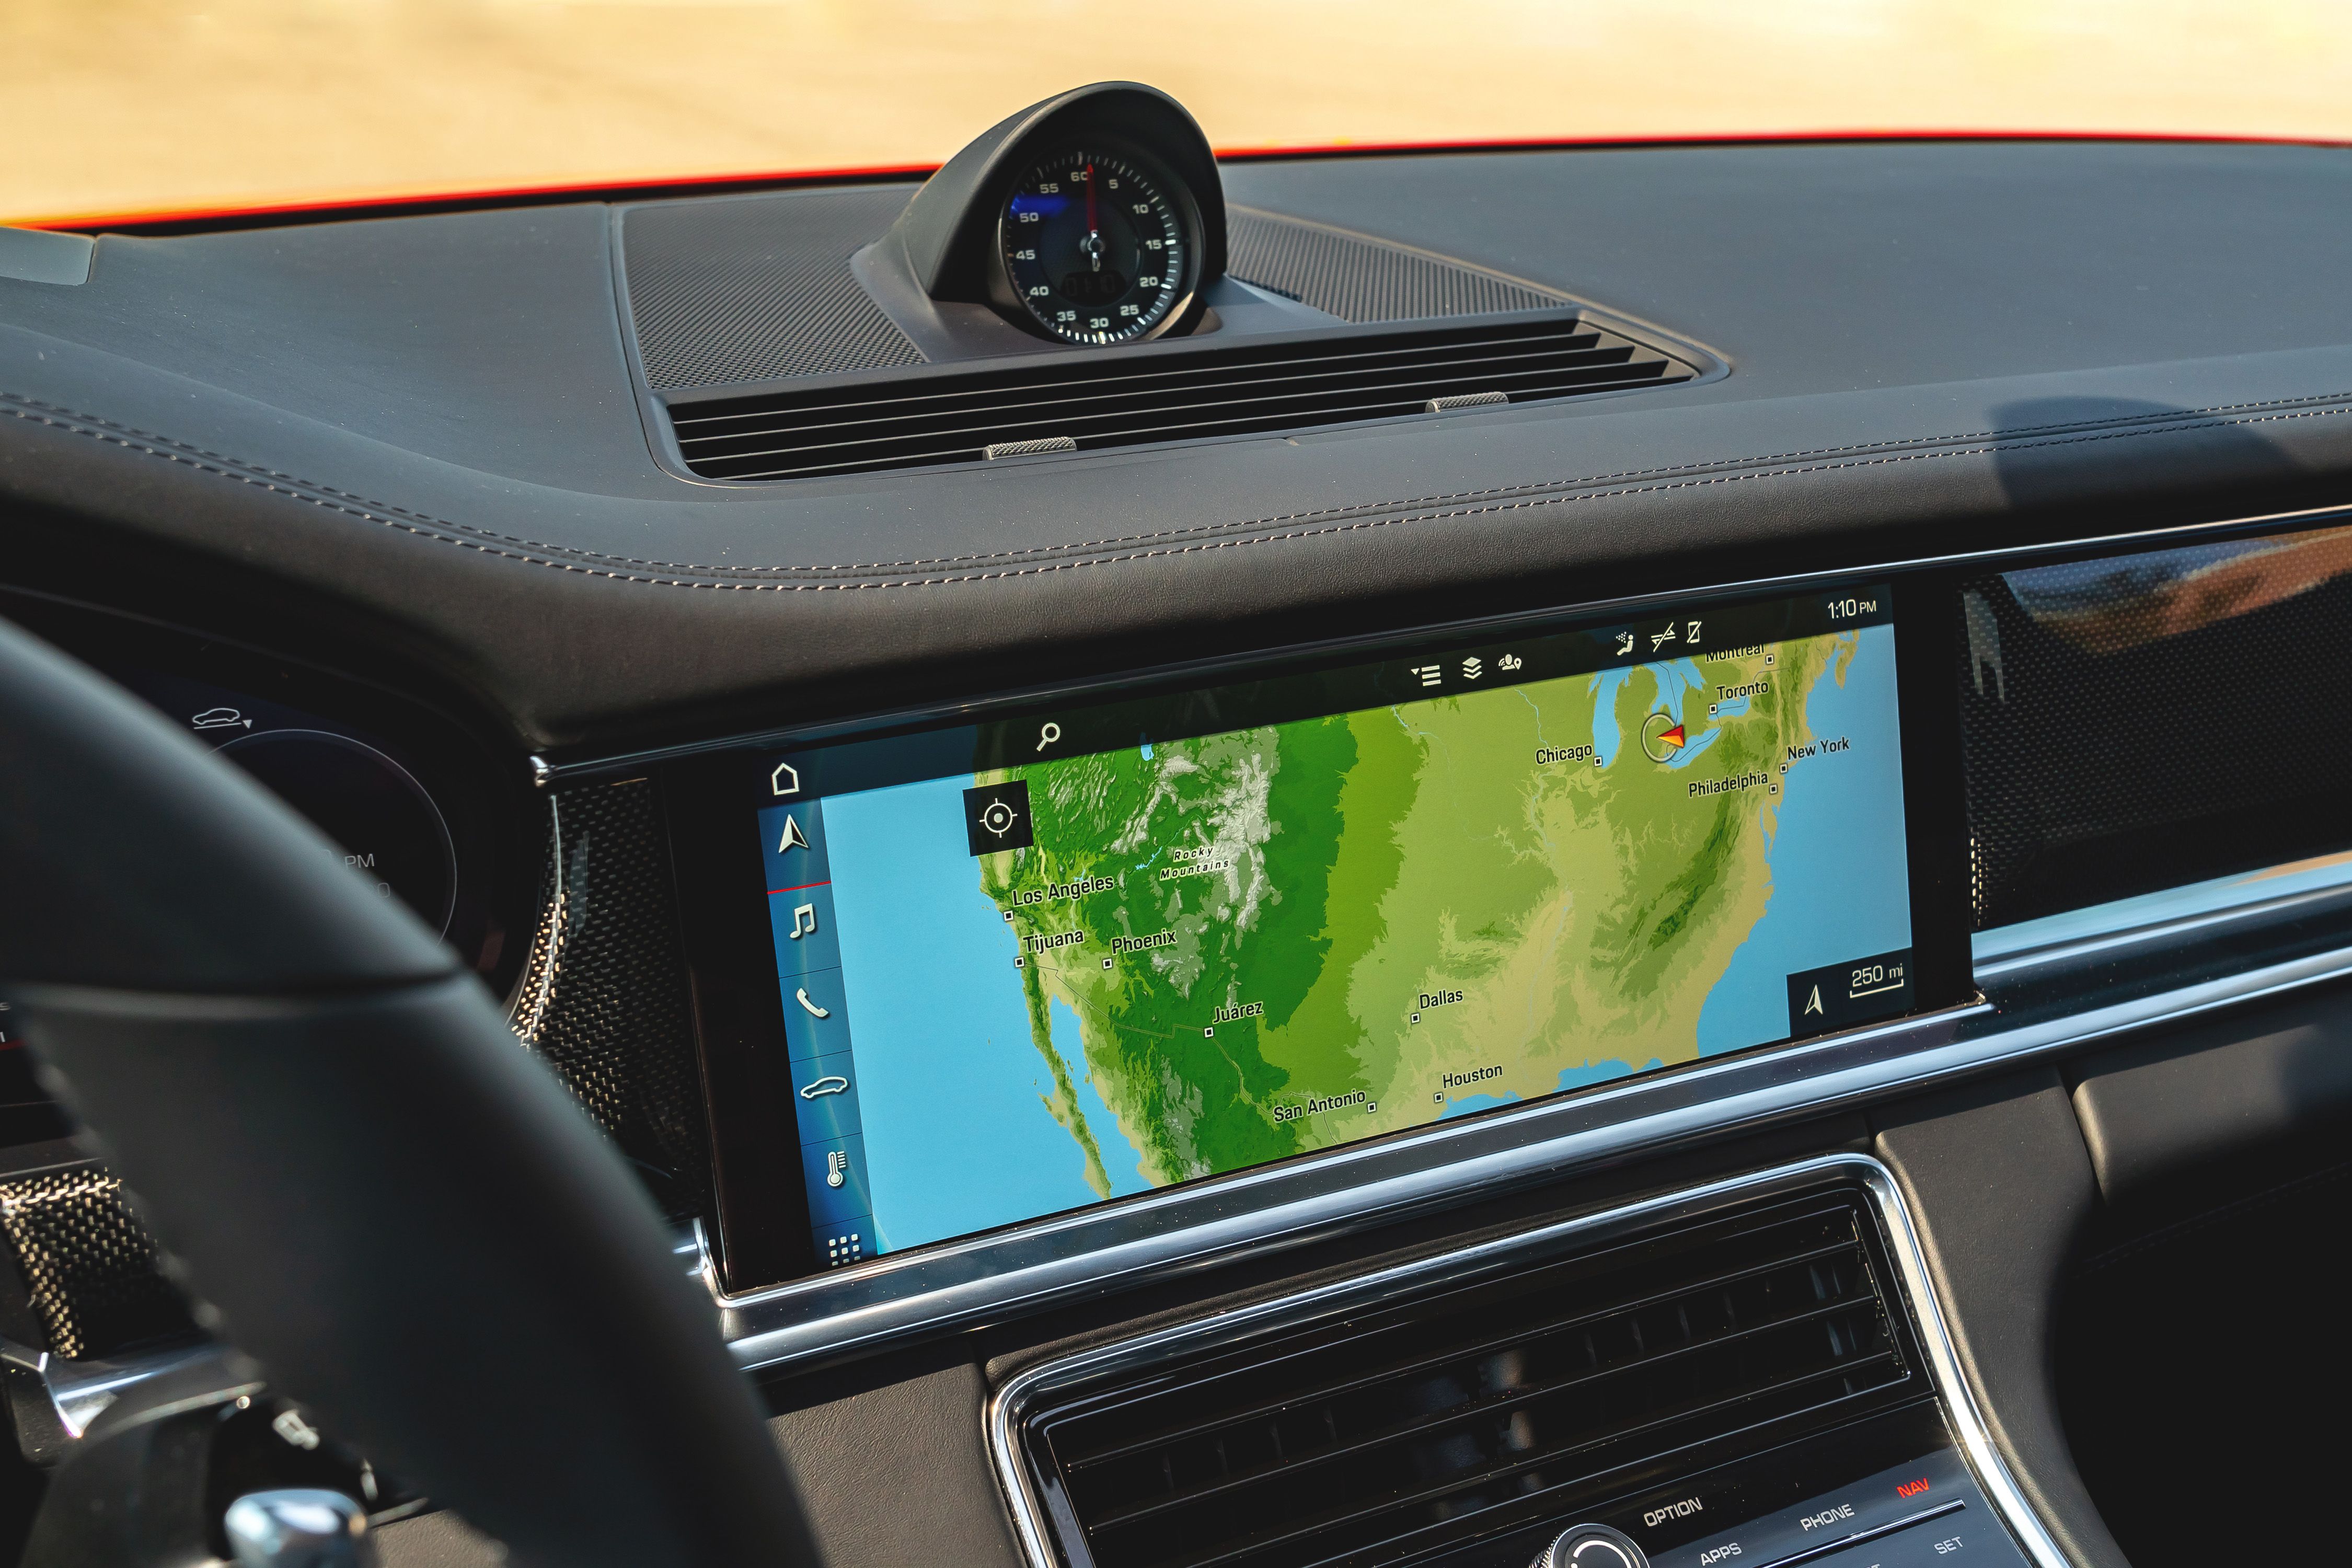 What Is Automotive Navigation System And How It Works